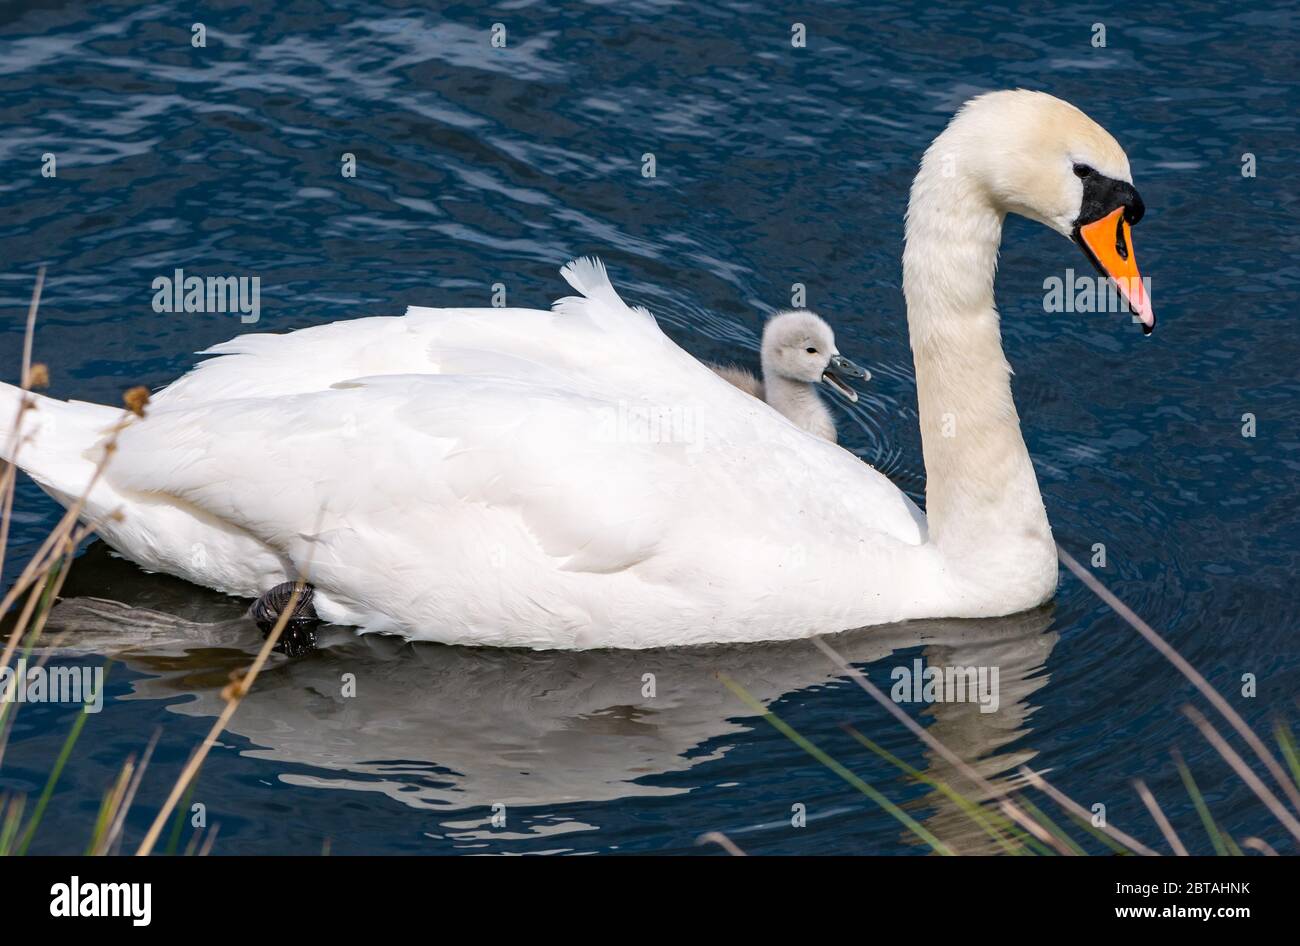 East Lothian, Scotland, United Kingdom, 24th May 2020. UK Weather: A one-week old cygnet learns from mute swan parent in a reservoir in the sunshine Stock Photo